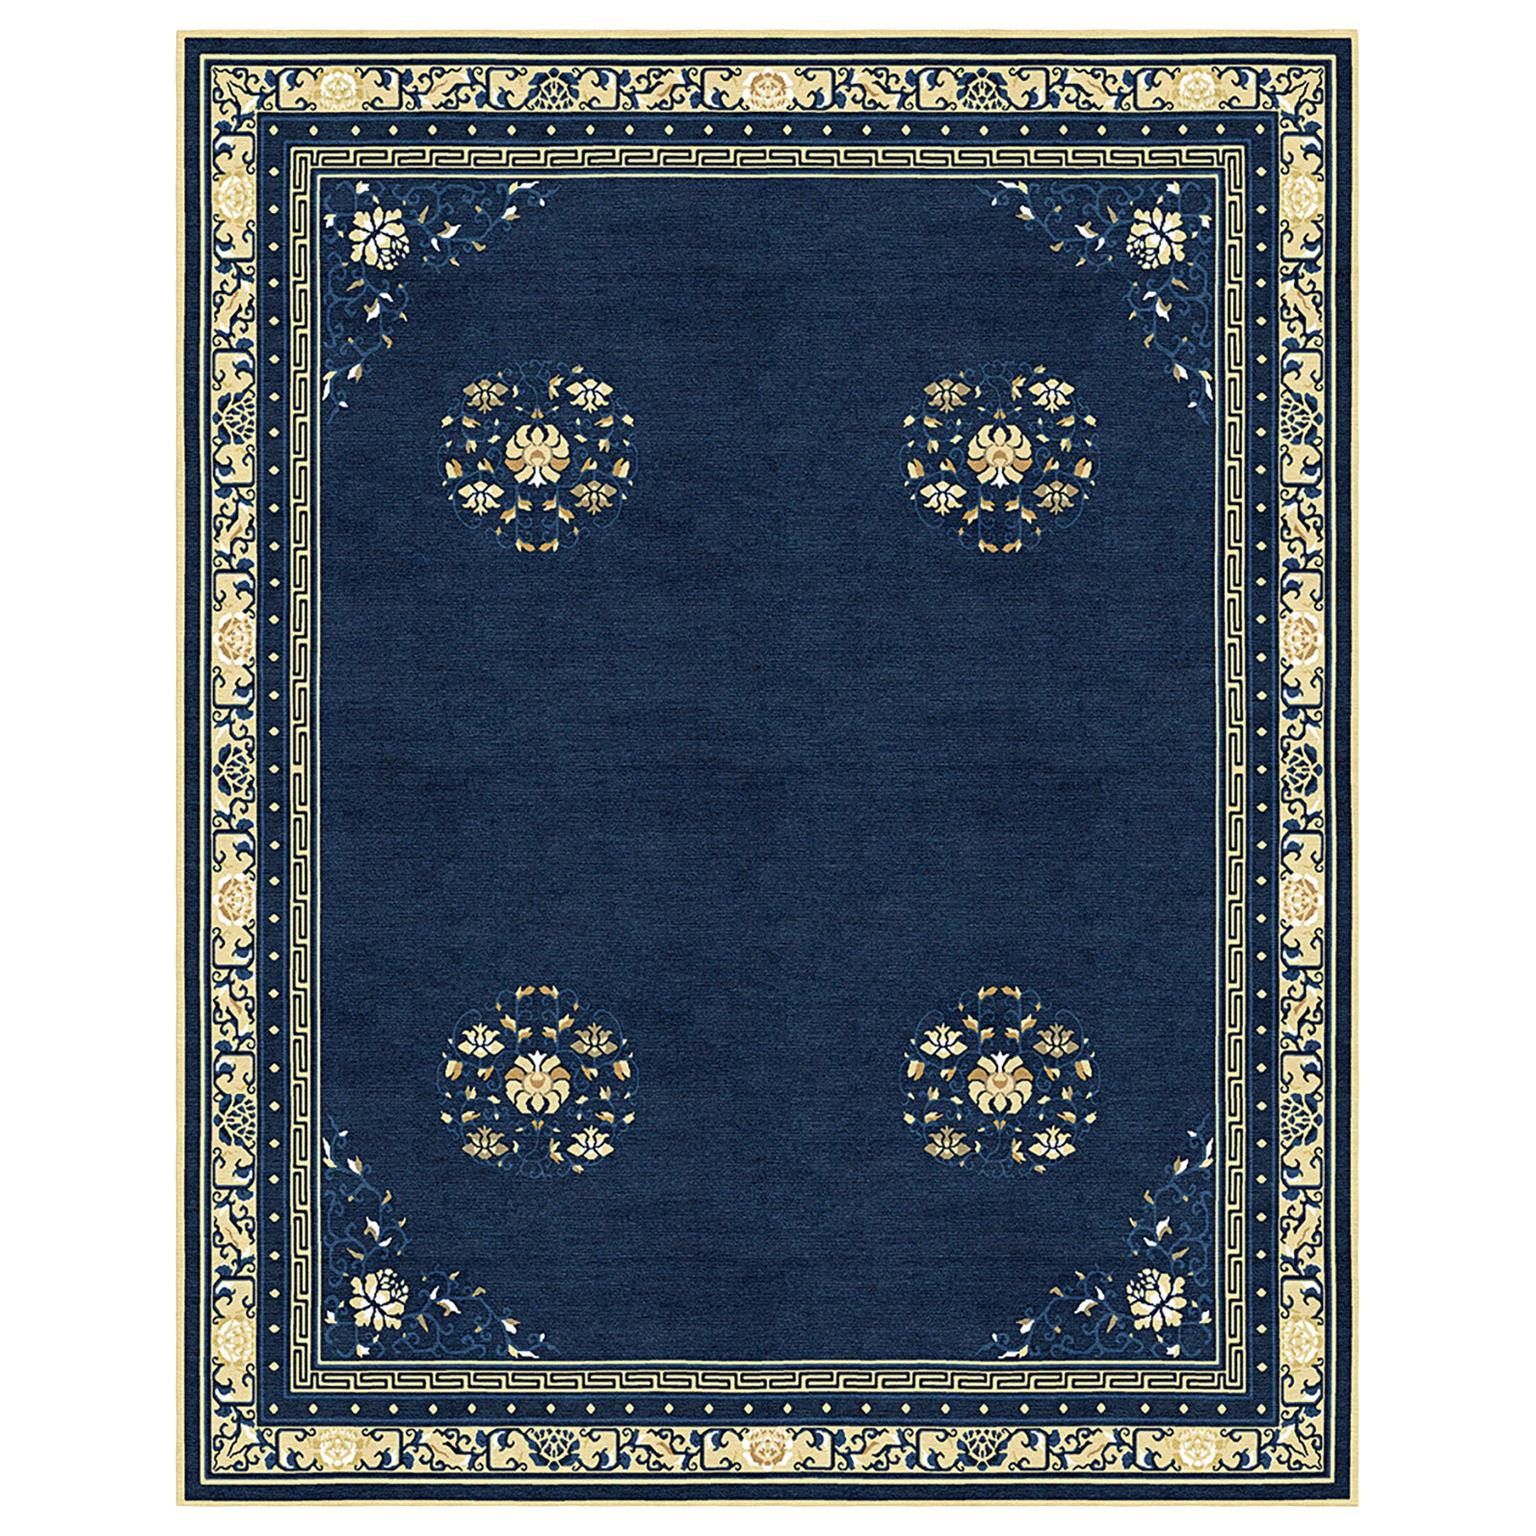 Floral Rug Chinese style Natural Wool Silk - Floating Lotus River Blue For Sale